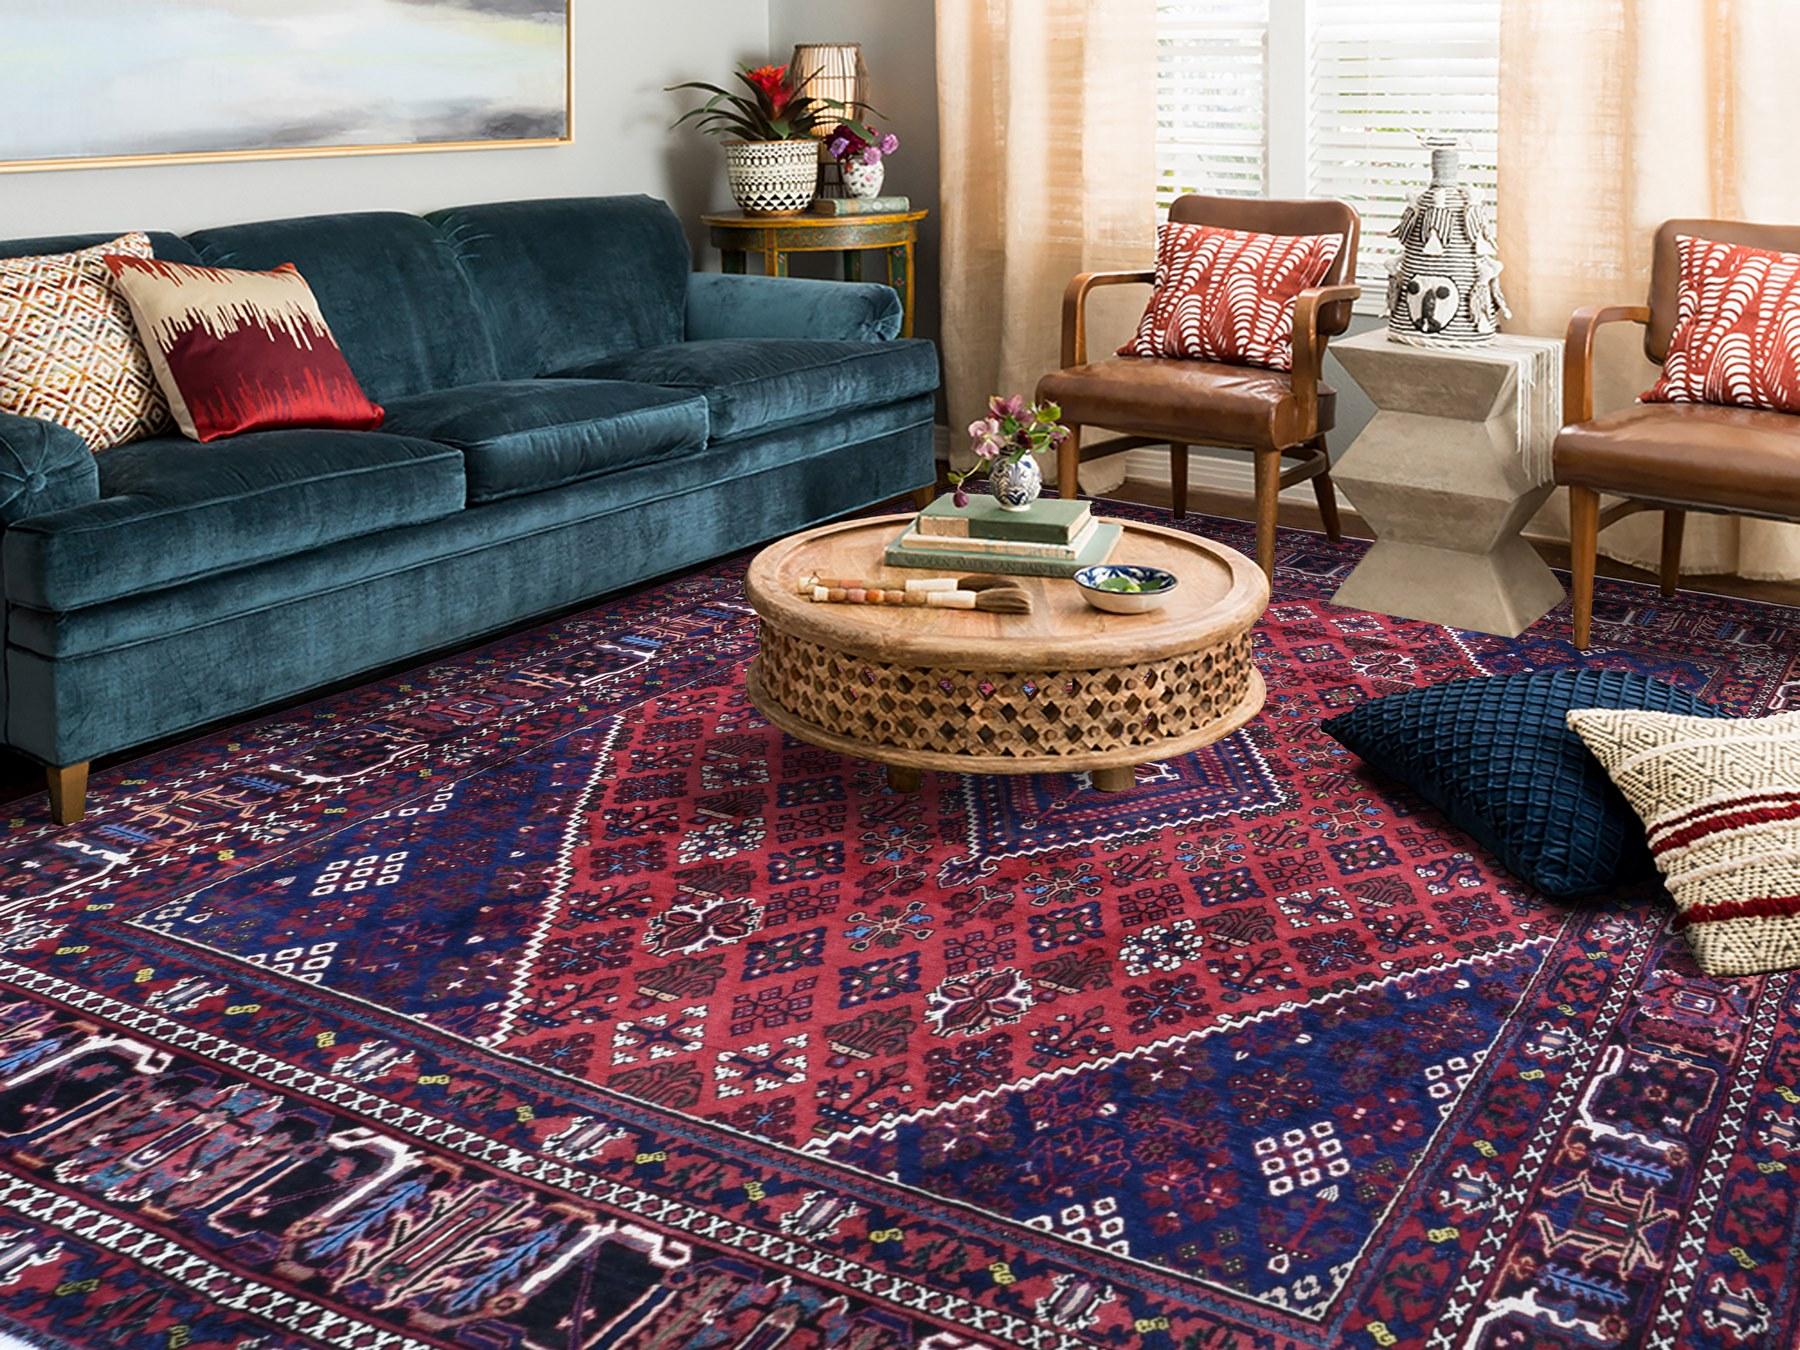 This fabulous hand knotted carpet has been created and designed for extra strength and durability. This rug has been handcrafted for weeks in the traditional method that is used to make rugs. This is truly a one-of-kind piece. 

Exact rug size in